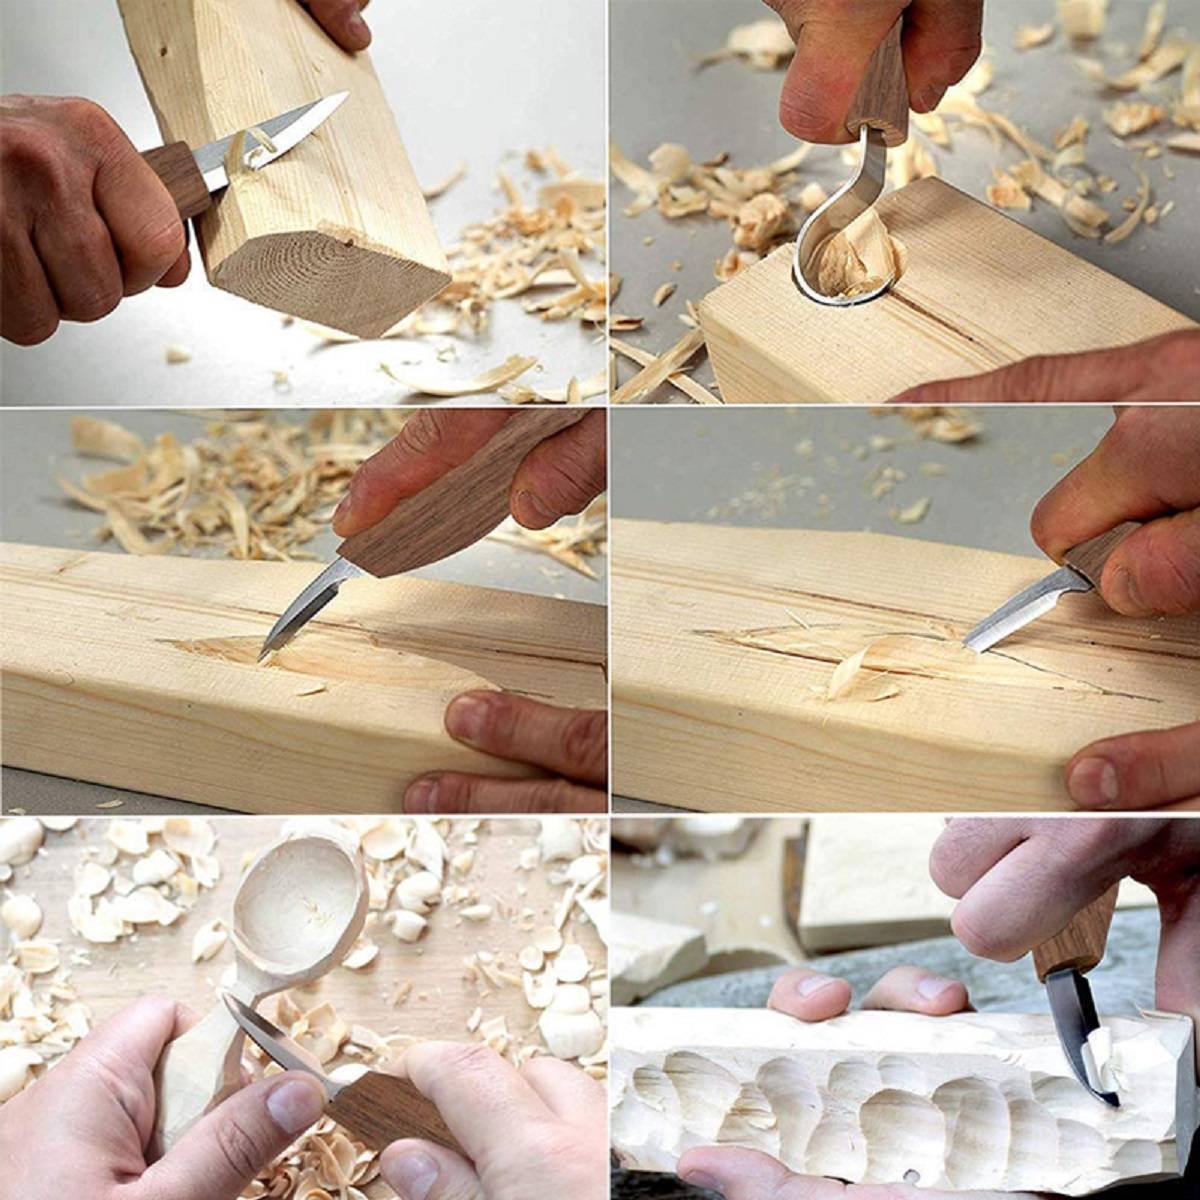 Wood Carving Kit 15PCS Wood Carving Tools Hand Carving Knife Set File Spoon  Carving Kit for Beginners Whittling Woodworking DIY - AliExpress